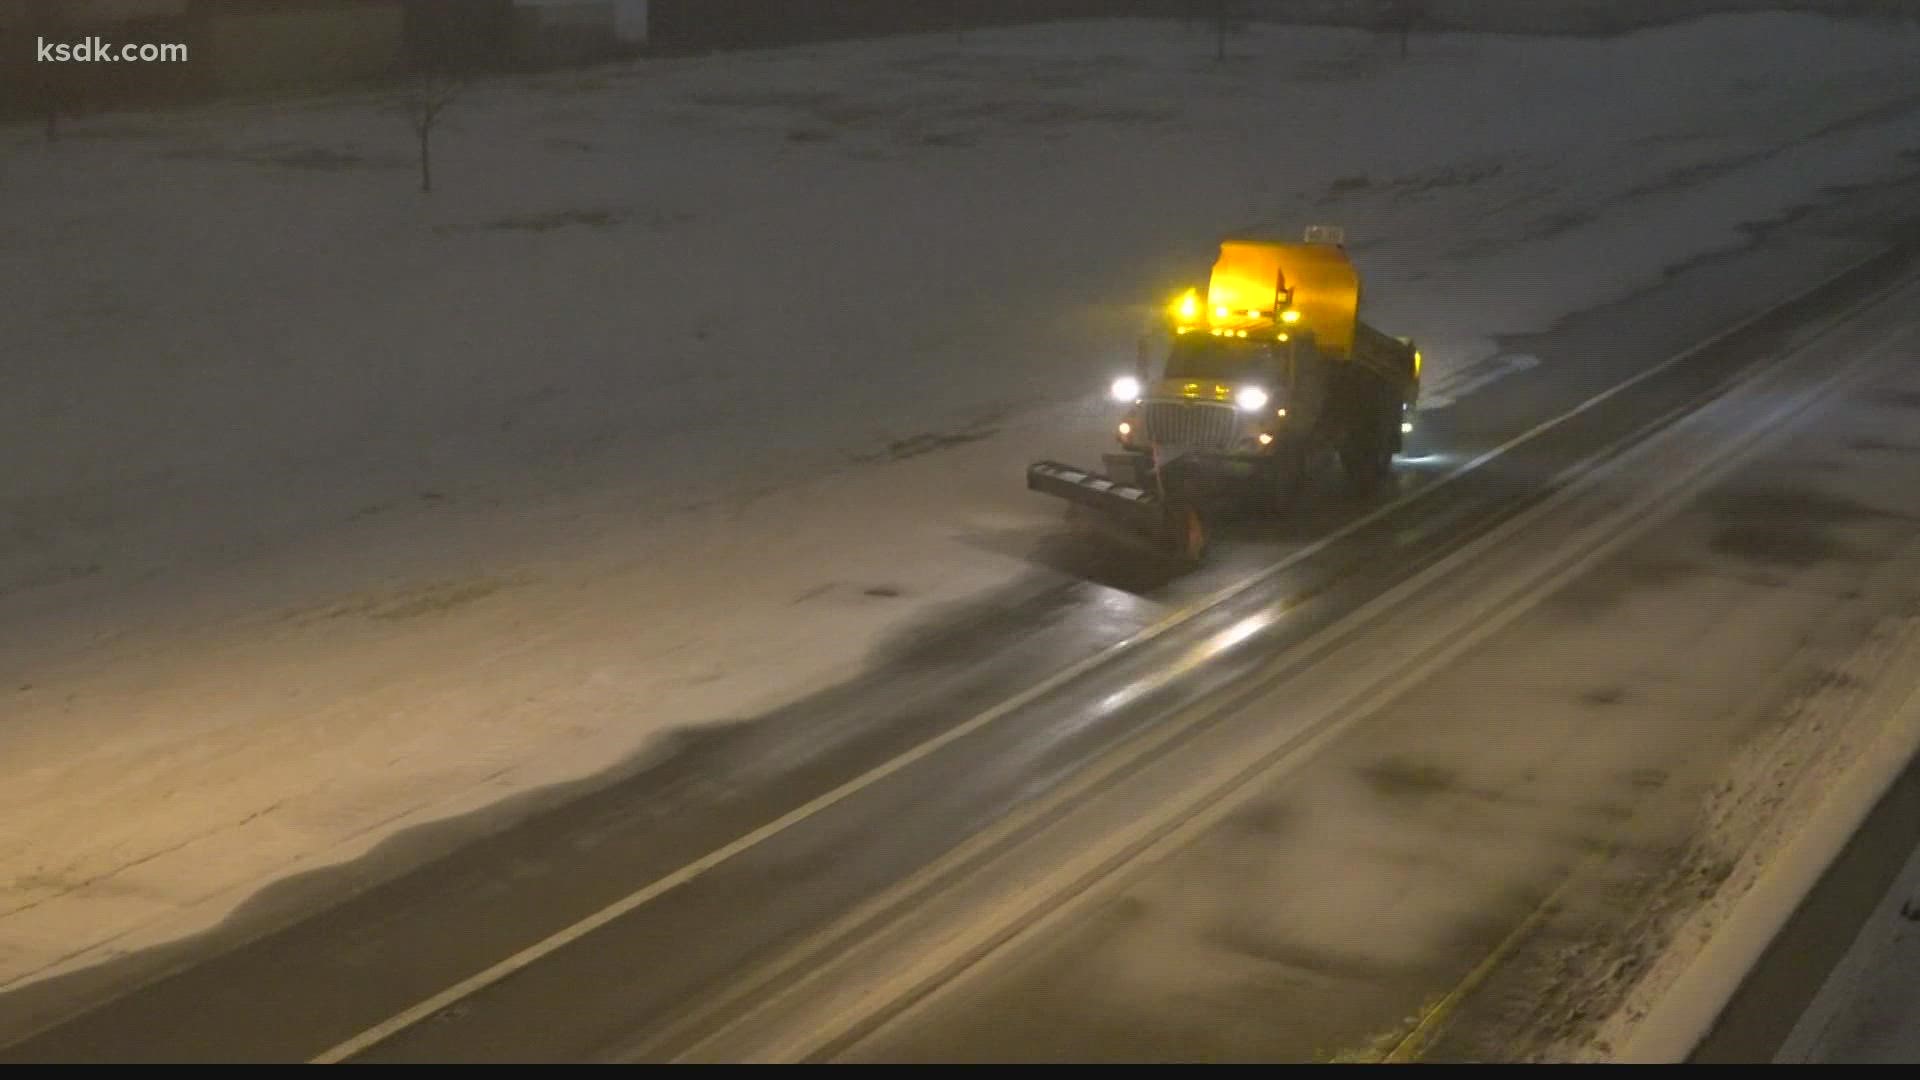 Transportation crews in Missouri and Illinois are working hard to keep roads clear as a winter storm brings heavy snow to the St. Louis metro.